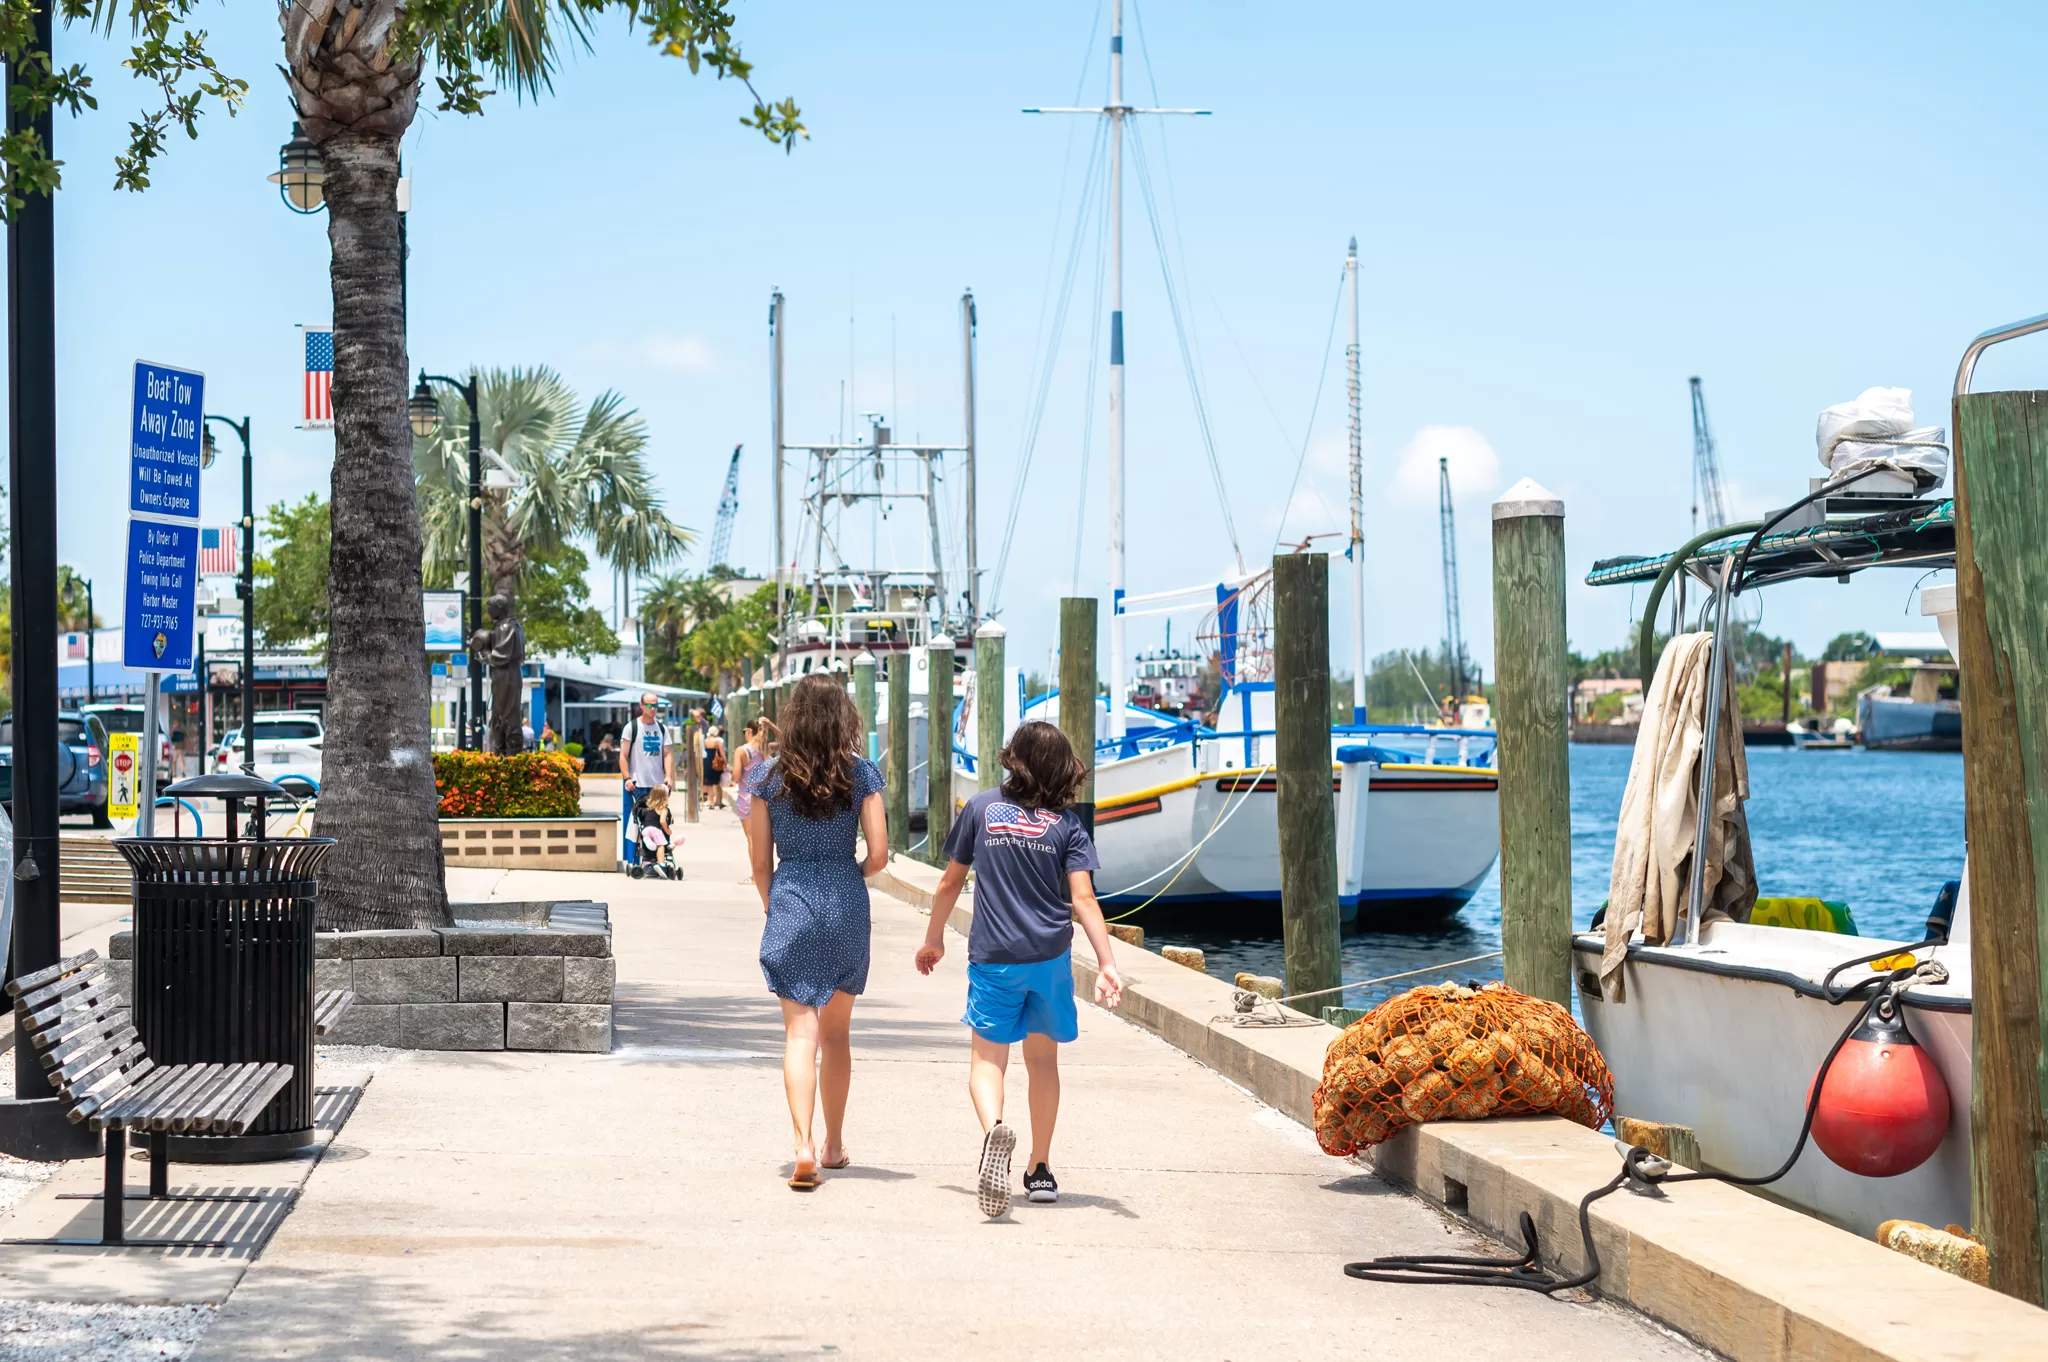 This image is for a blog post about Tarpon Springs Florida and shows a boy and girl walking downtown hear the sponge docks.